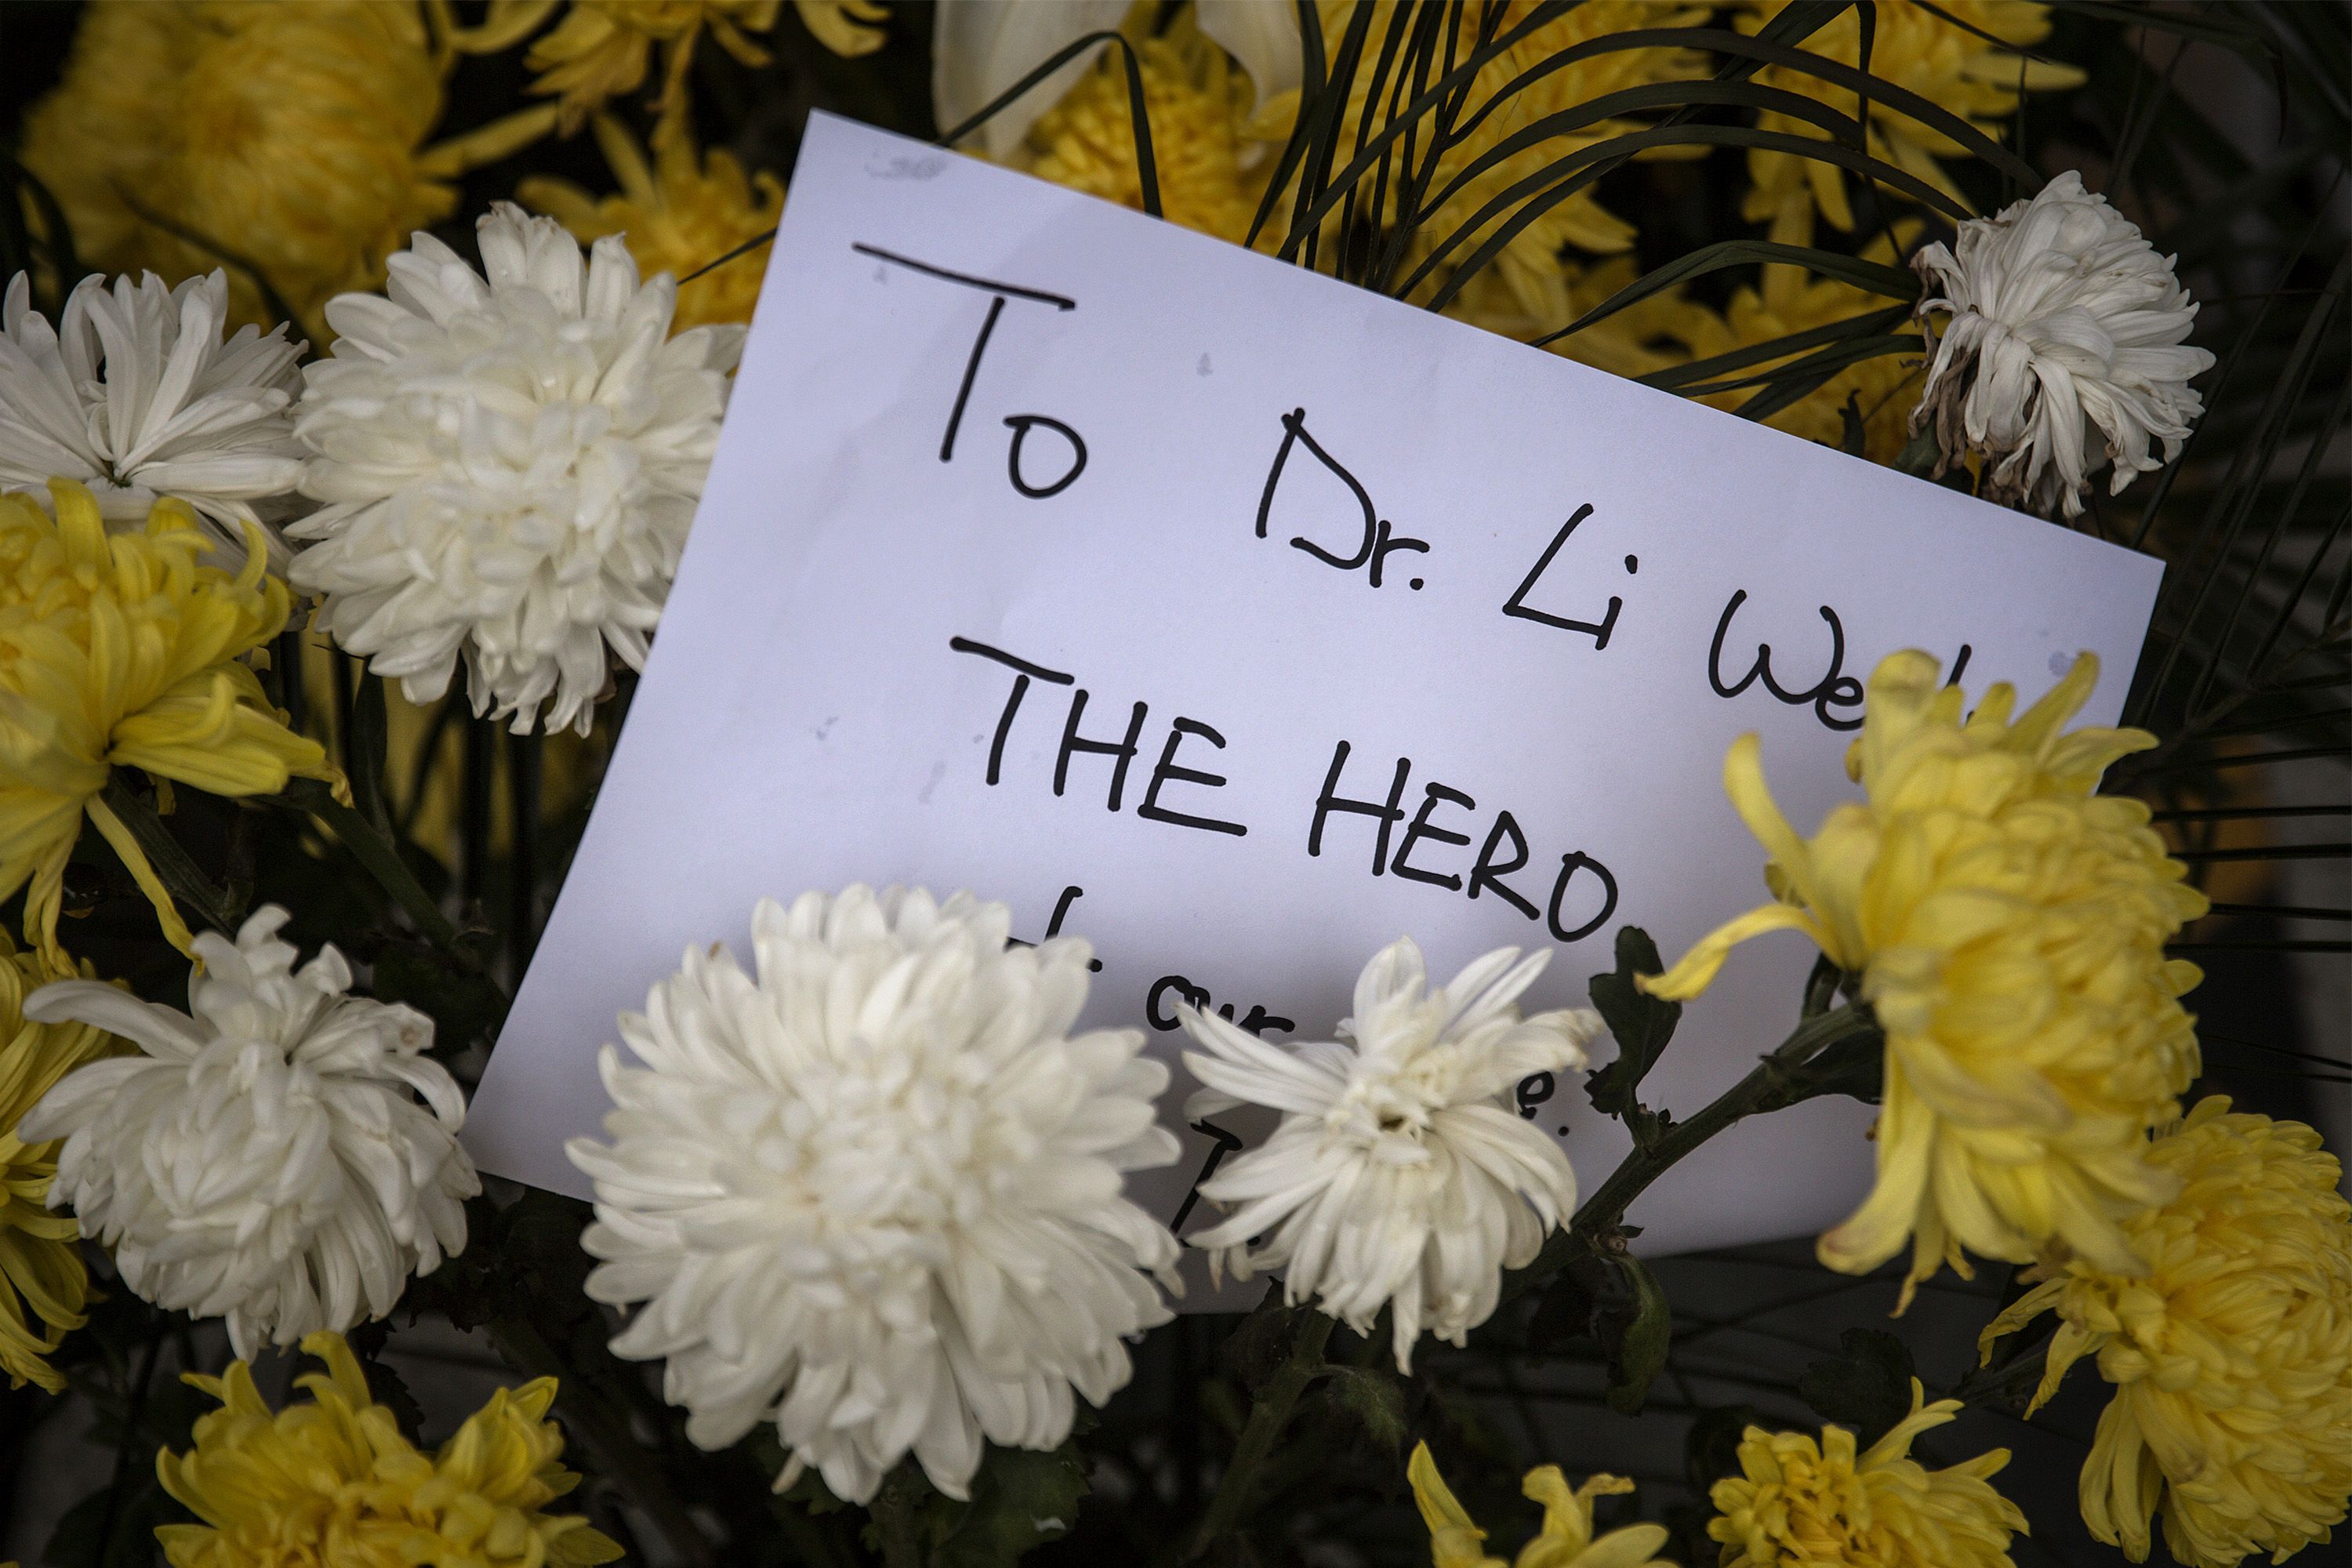 This is a sign that reads "To Dr. Li the hero," nestled in flowers